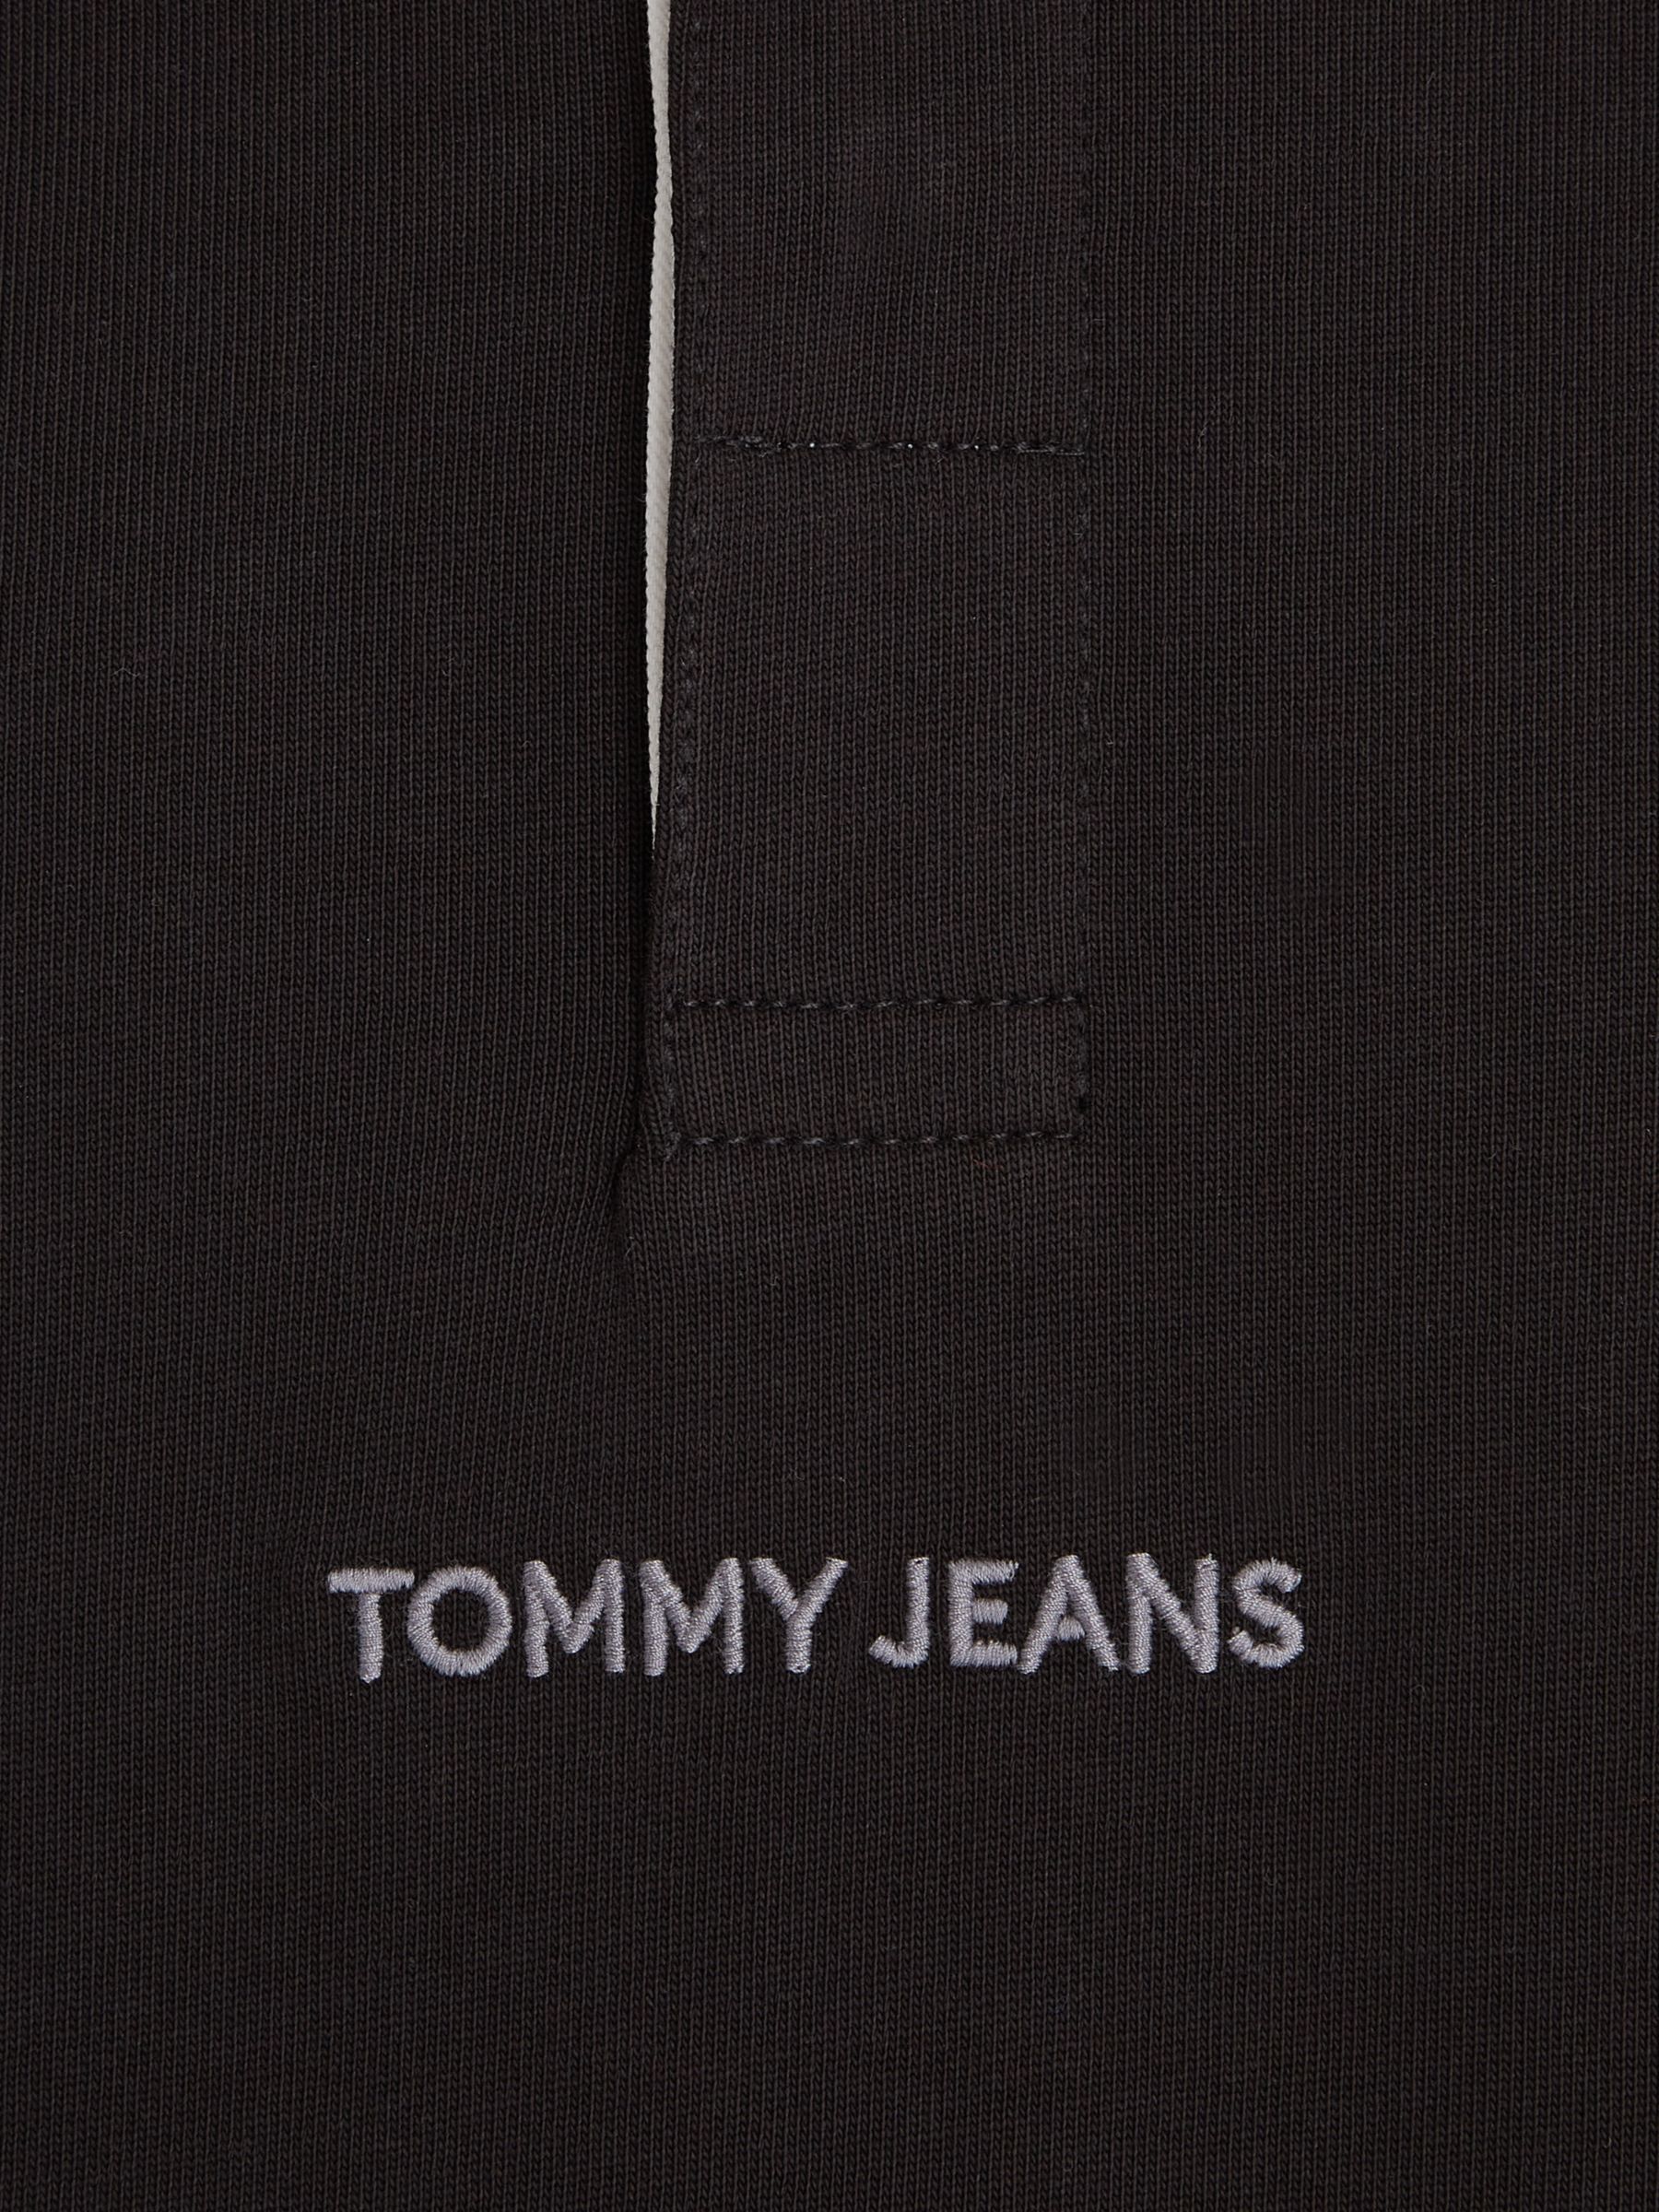 Tommy Jeans Classic Long Sleeve Rugby Top, Black, L